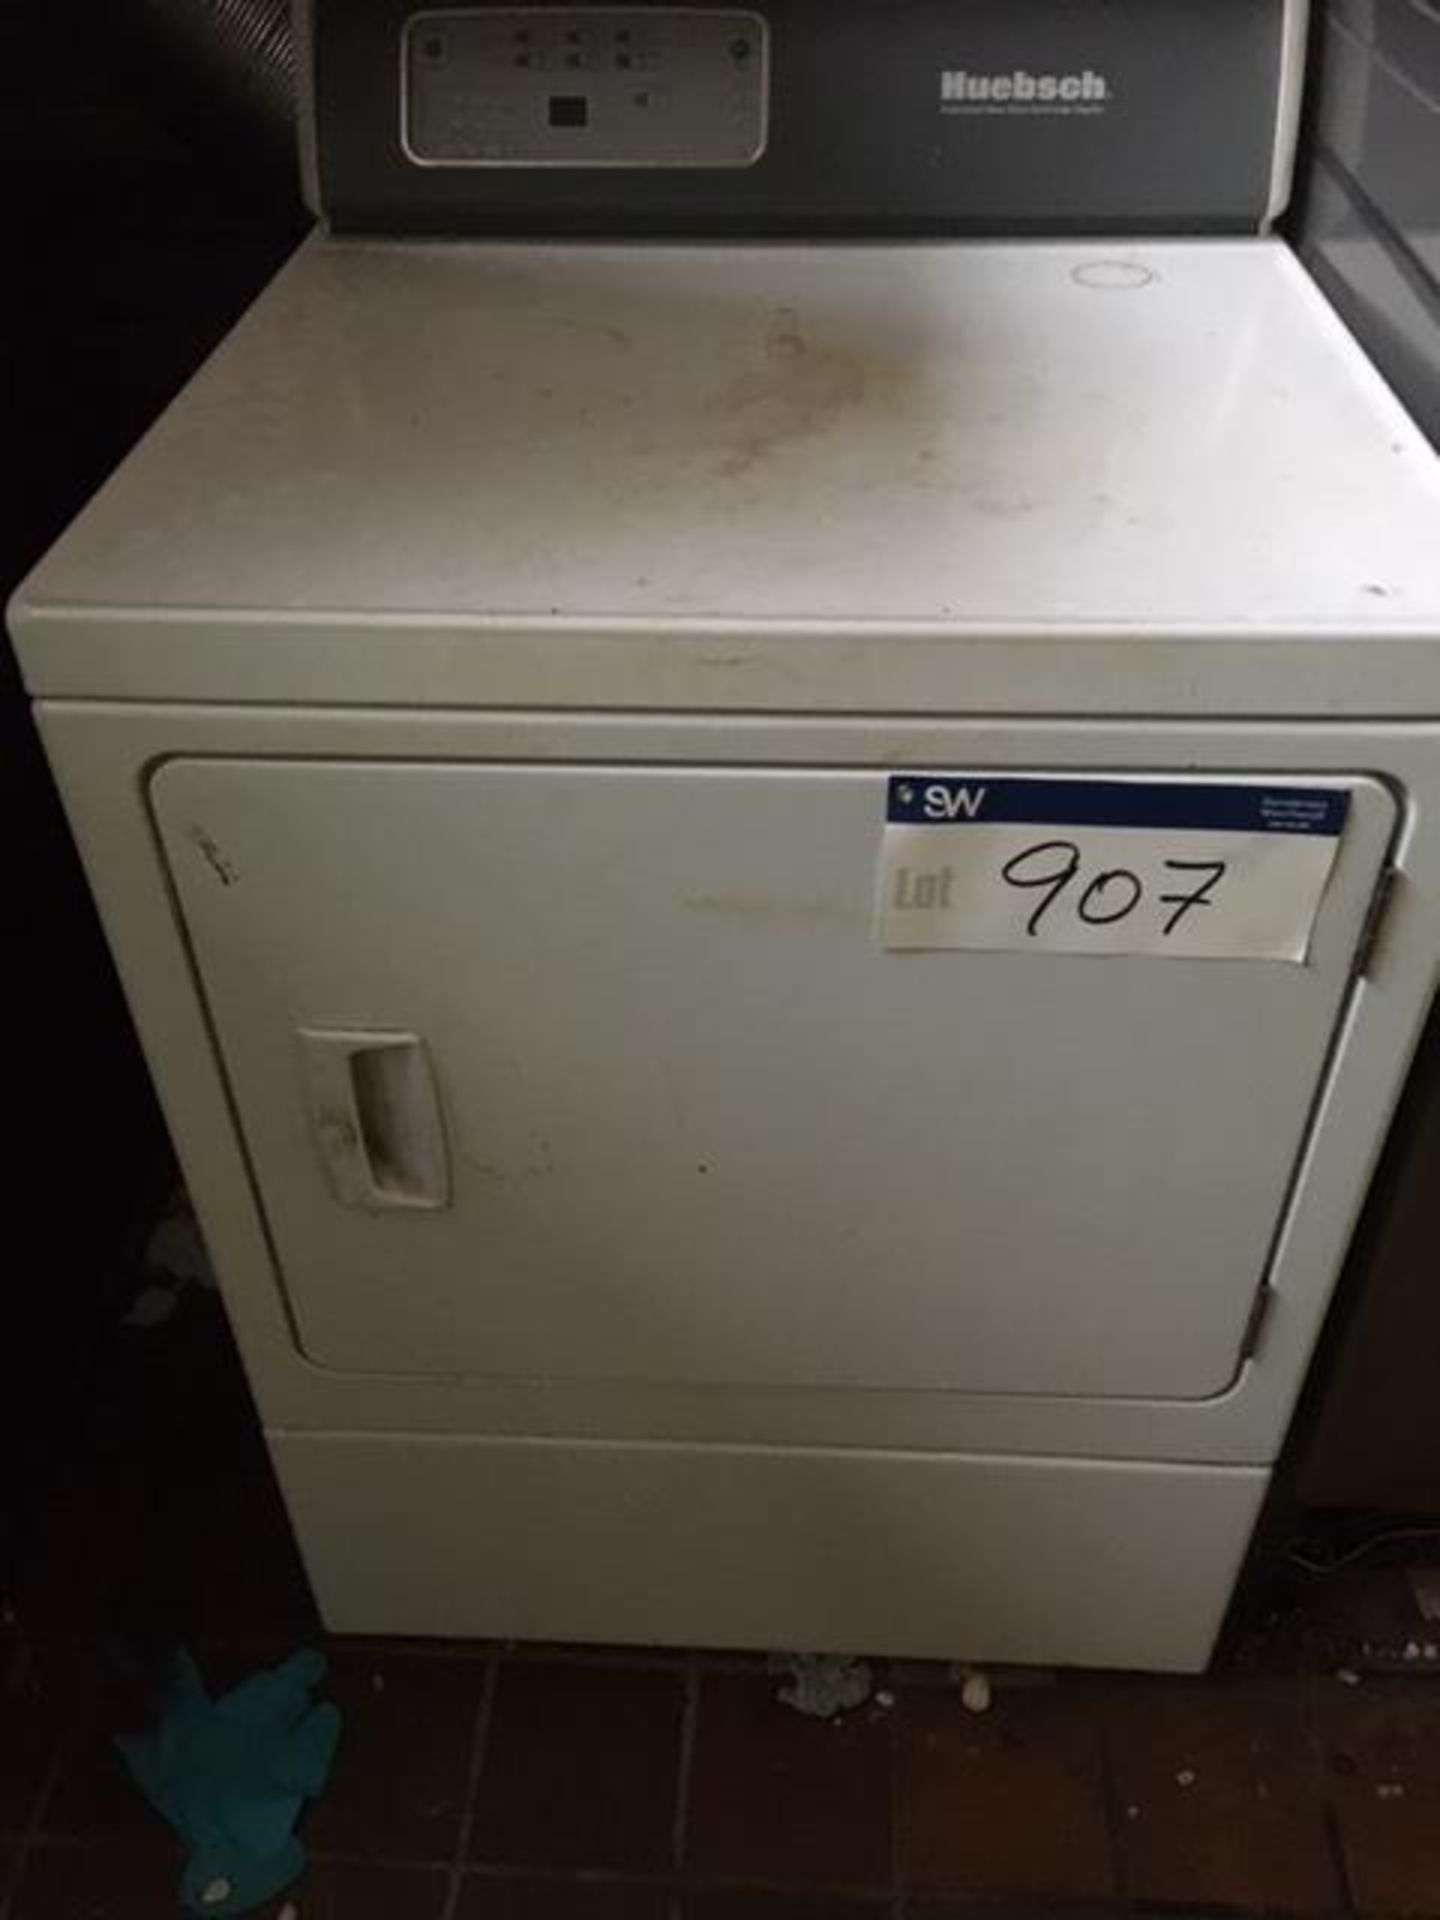 Huebsch Commercial Tumble Dryer (please note - all